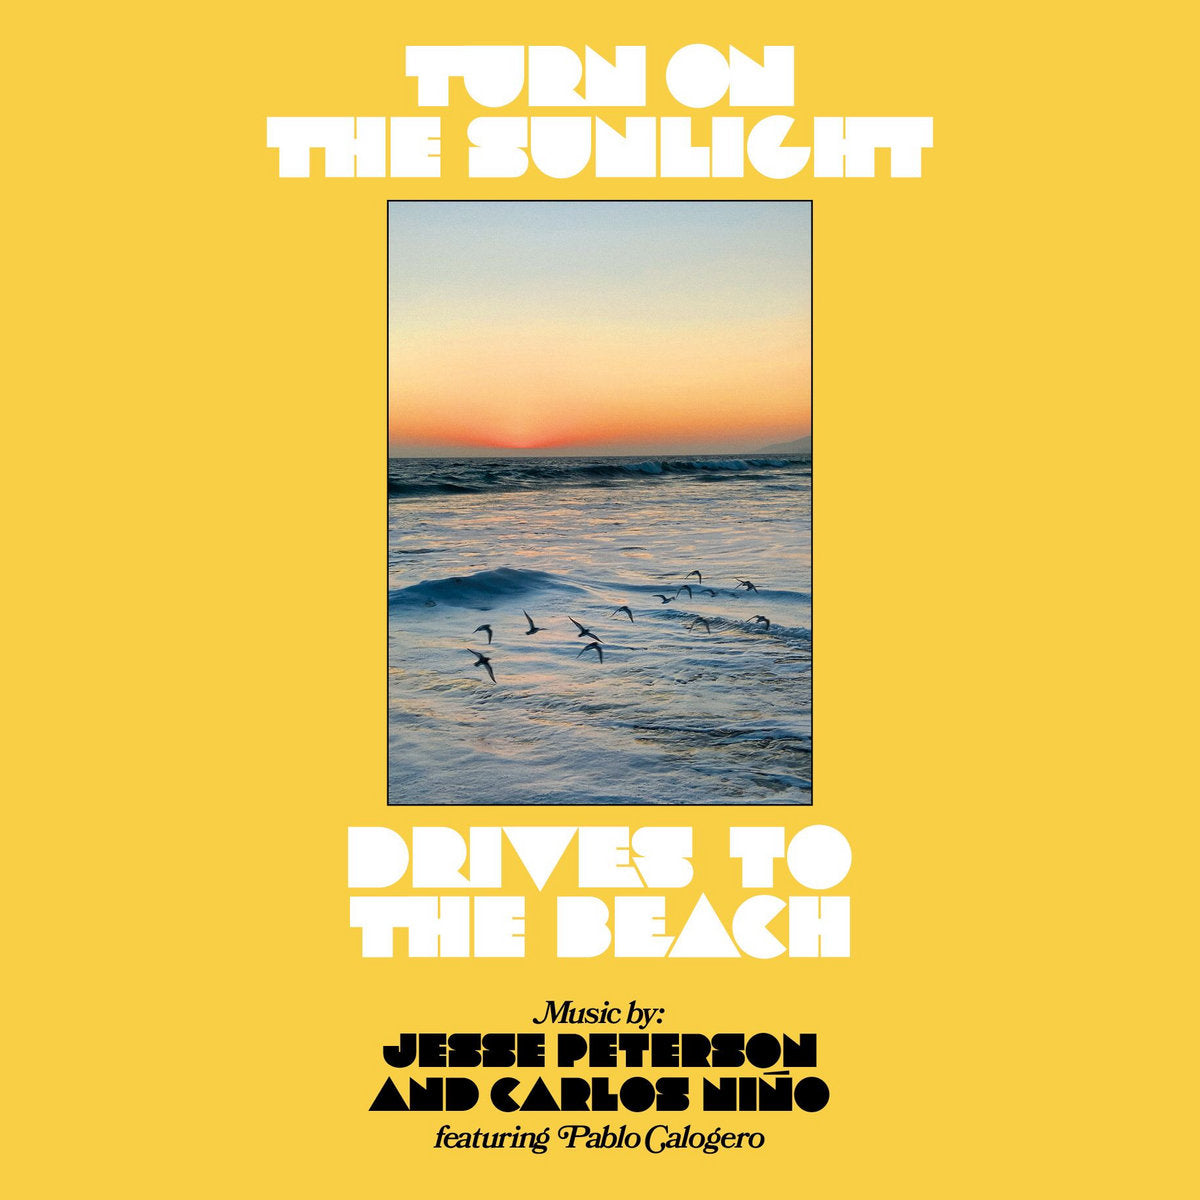 Drives To The Beach (New LP)